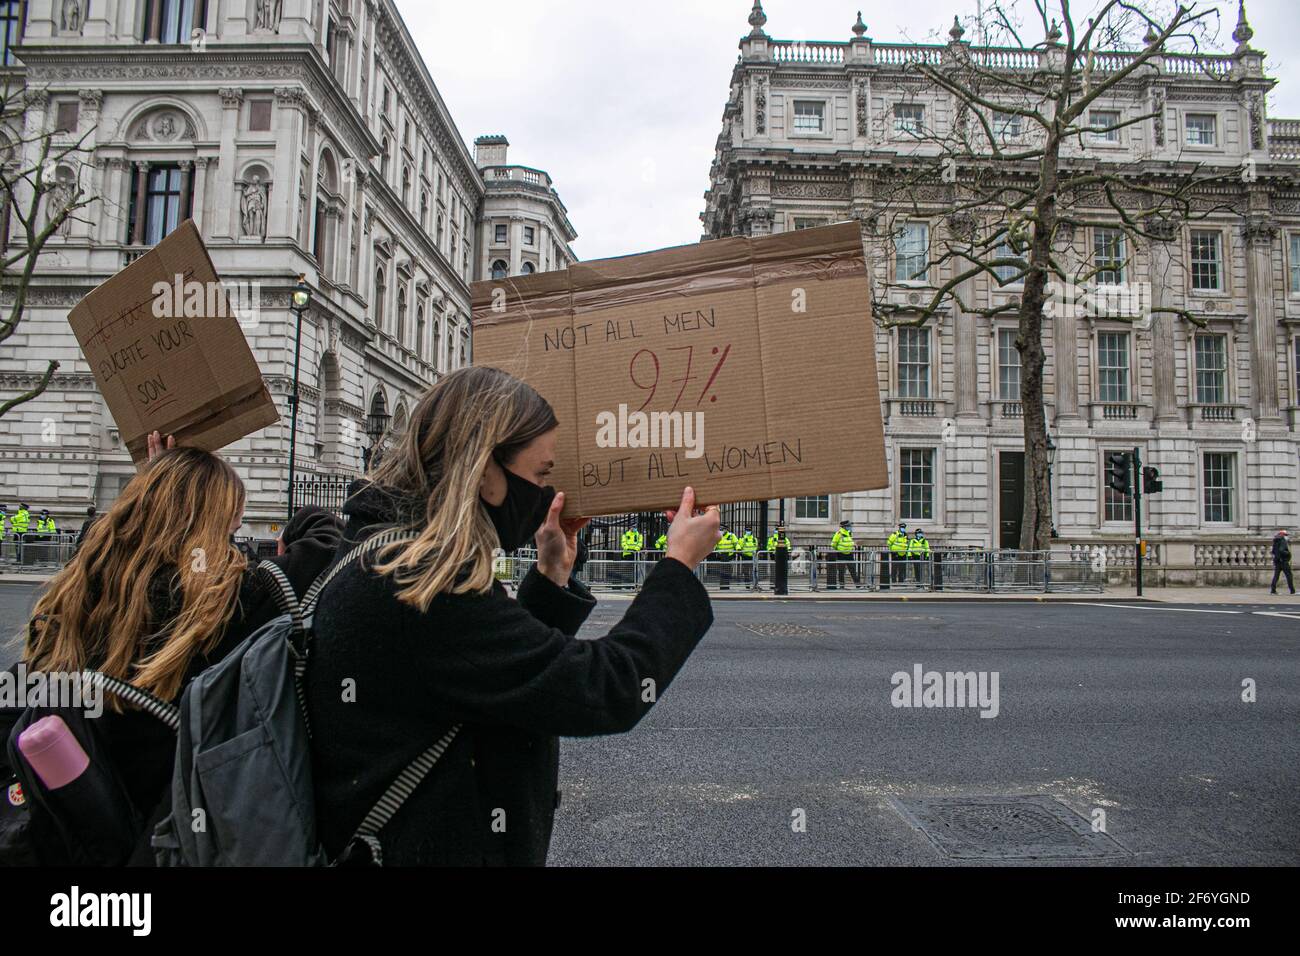 WESTMINSTER LONDON, UK 3 April 2021. Protesters mainly young women demonstrate peacefully in Parliament Square as they took part The 97% Women's march group to demand safety in the streets against sexual harassment following the murder of Sarah Everard who was kidnapped and later found murdered after after walking home from Clapham Common in 3 March Credit amer ghazzal/Alamy Live News Stock Photo